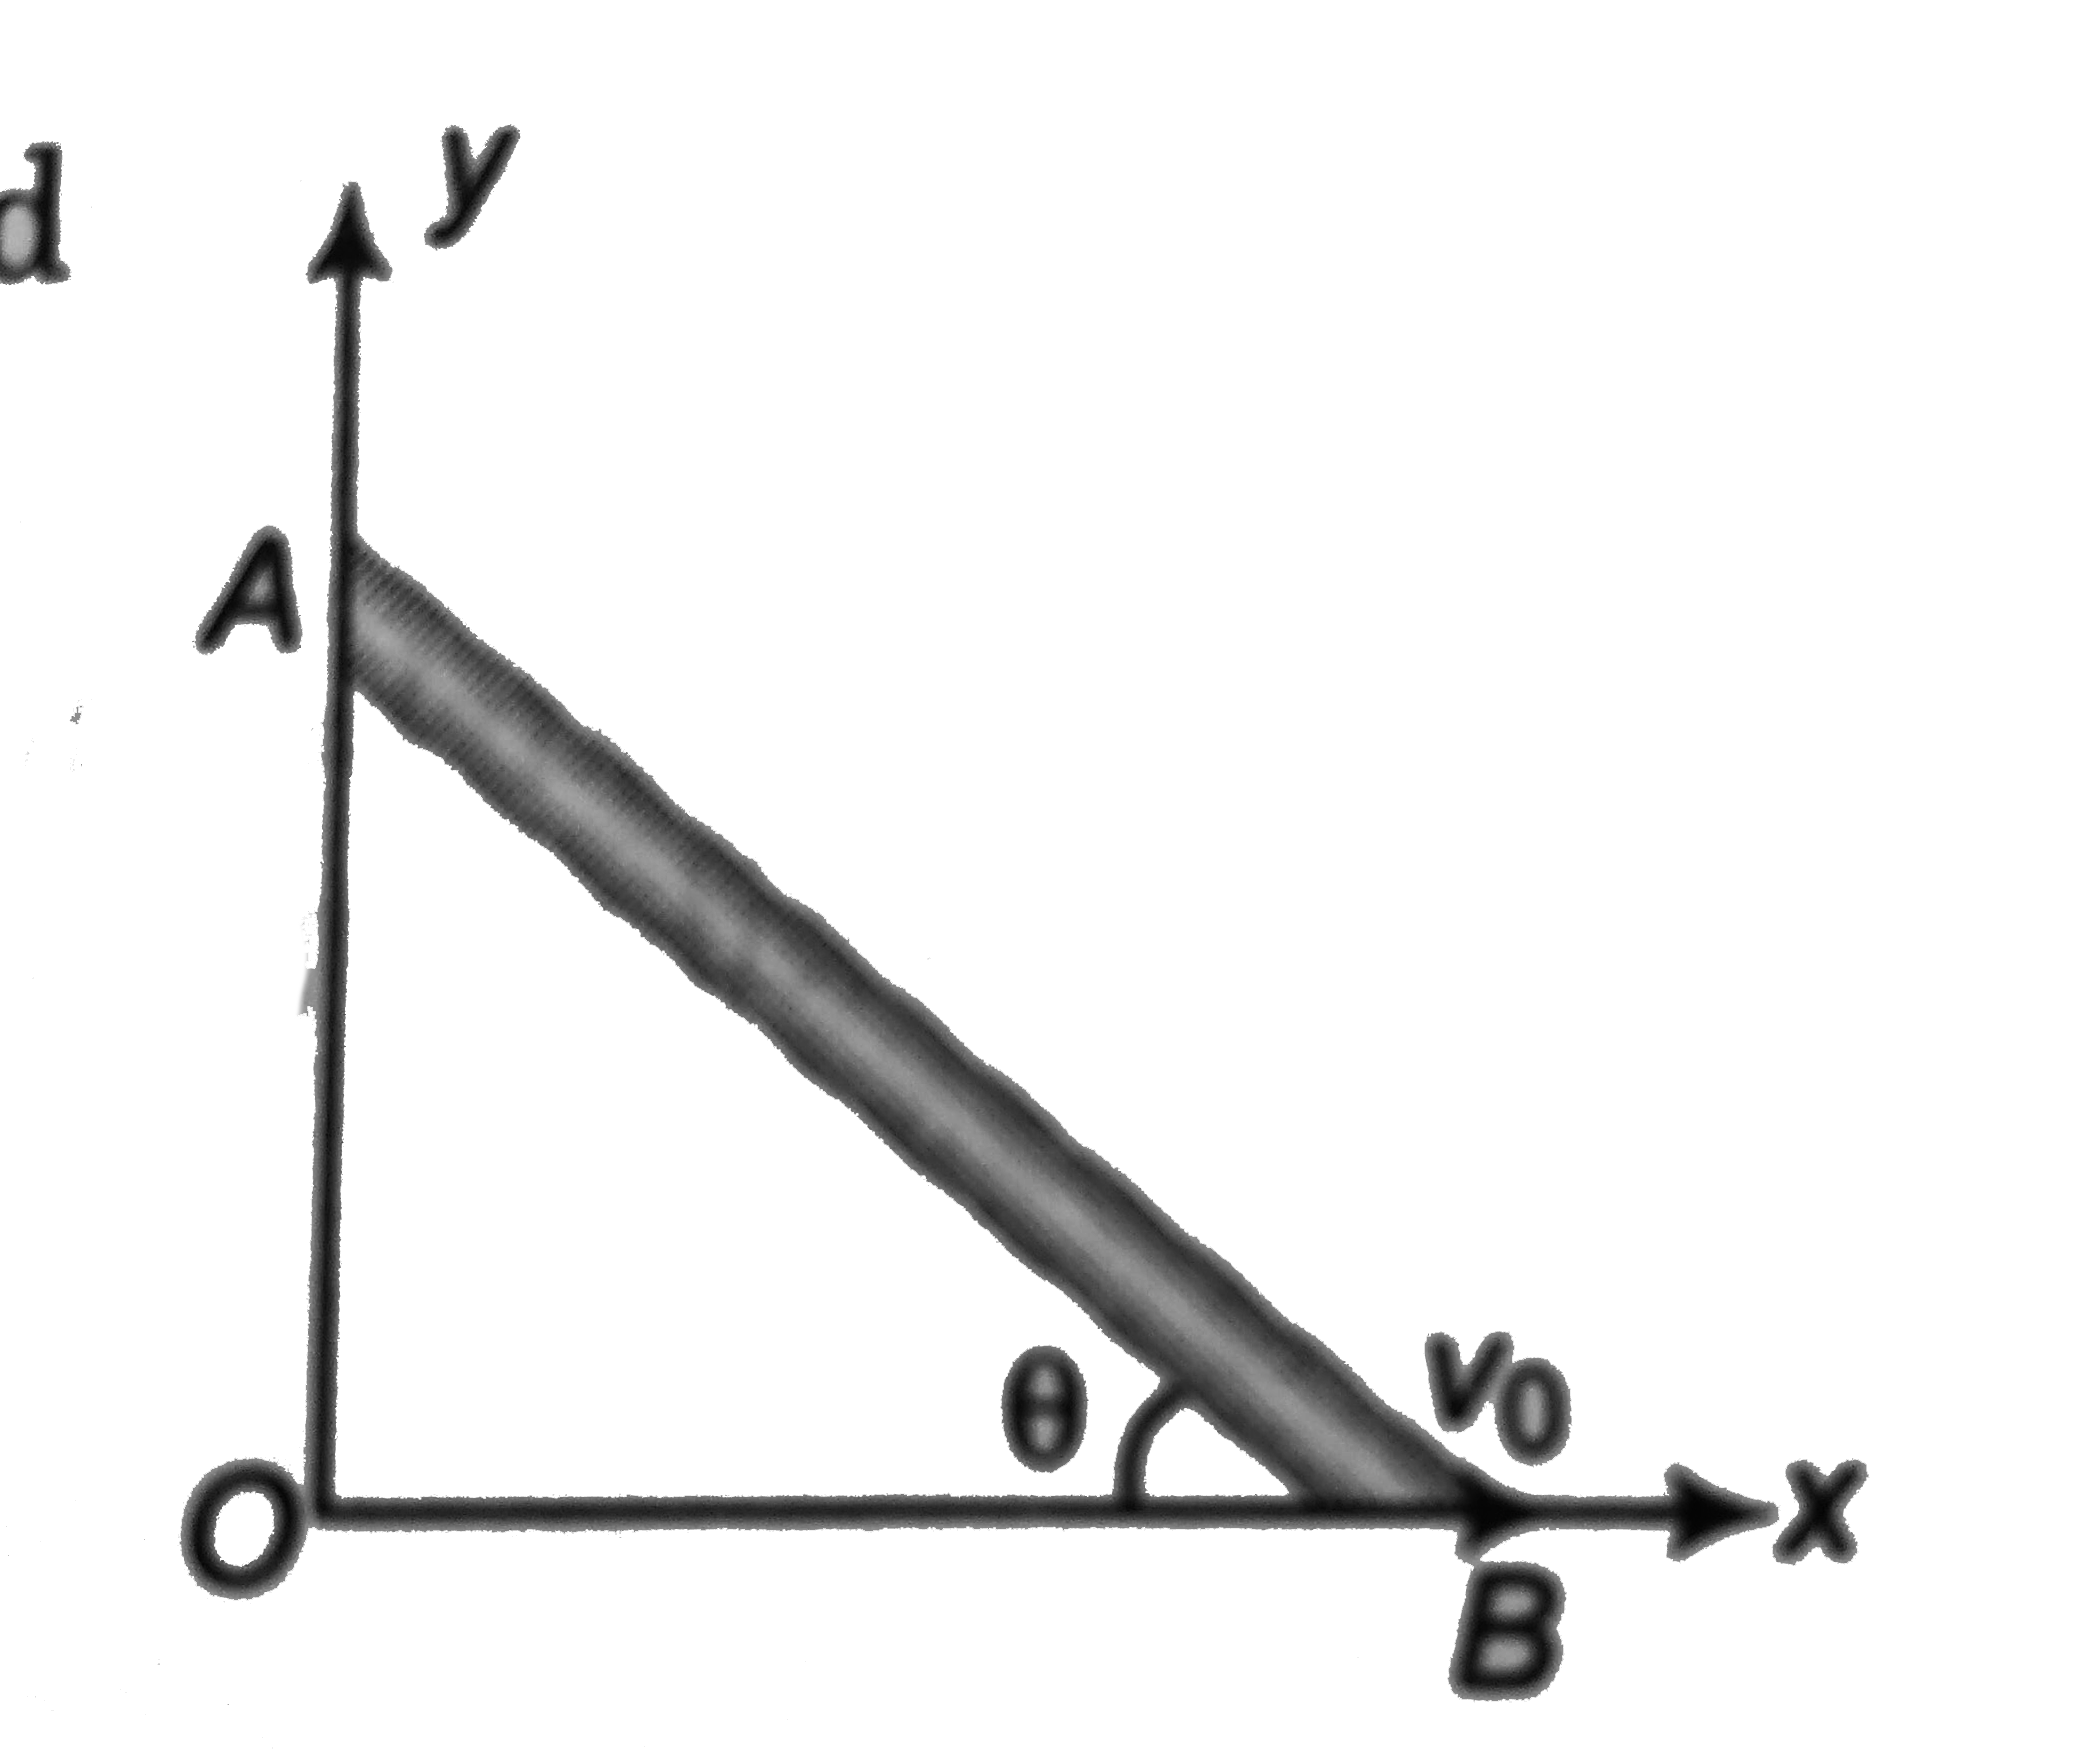 The end B of the rod AB which makes angle theta with the floor is being pulled with a constant velocity v(v) as shown. The length of the rod is l.